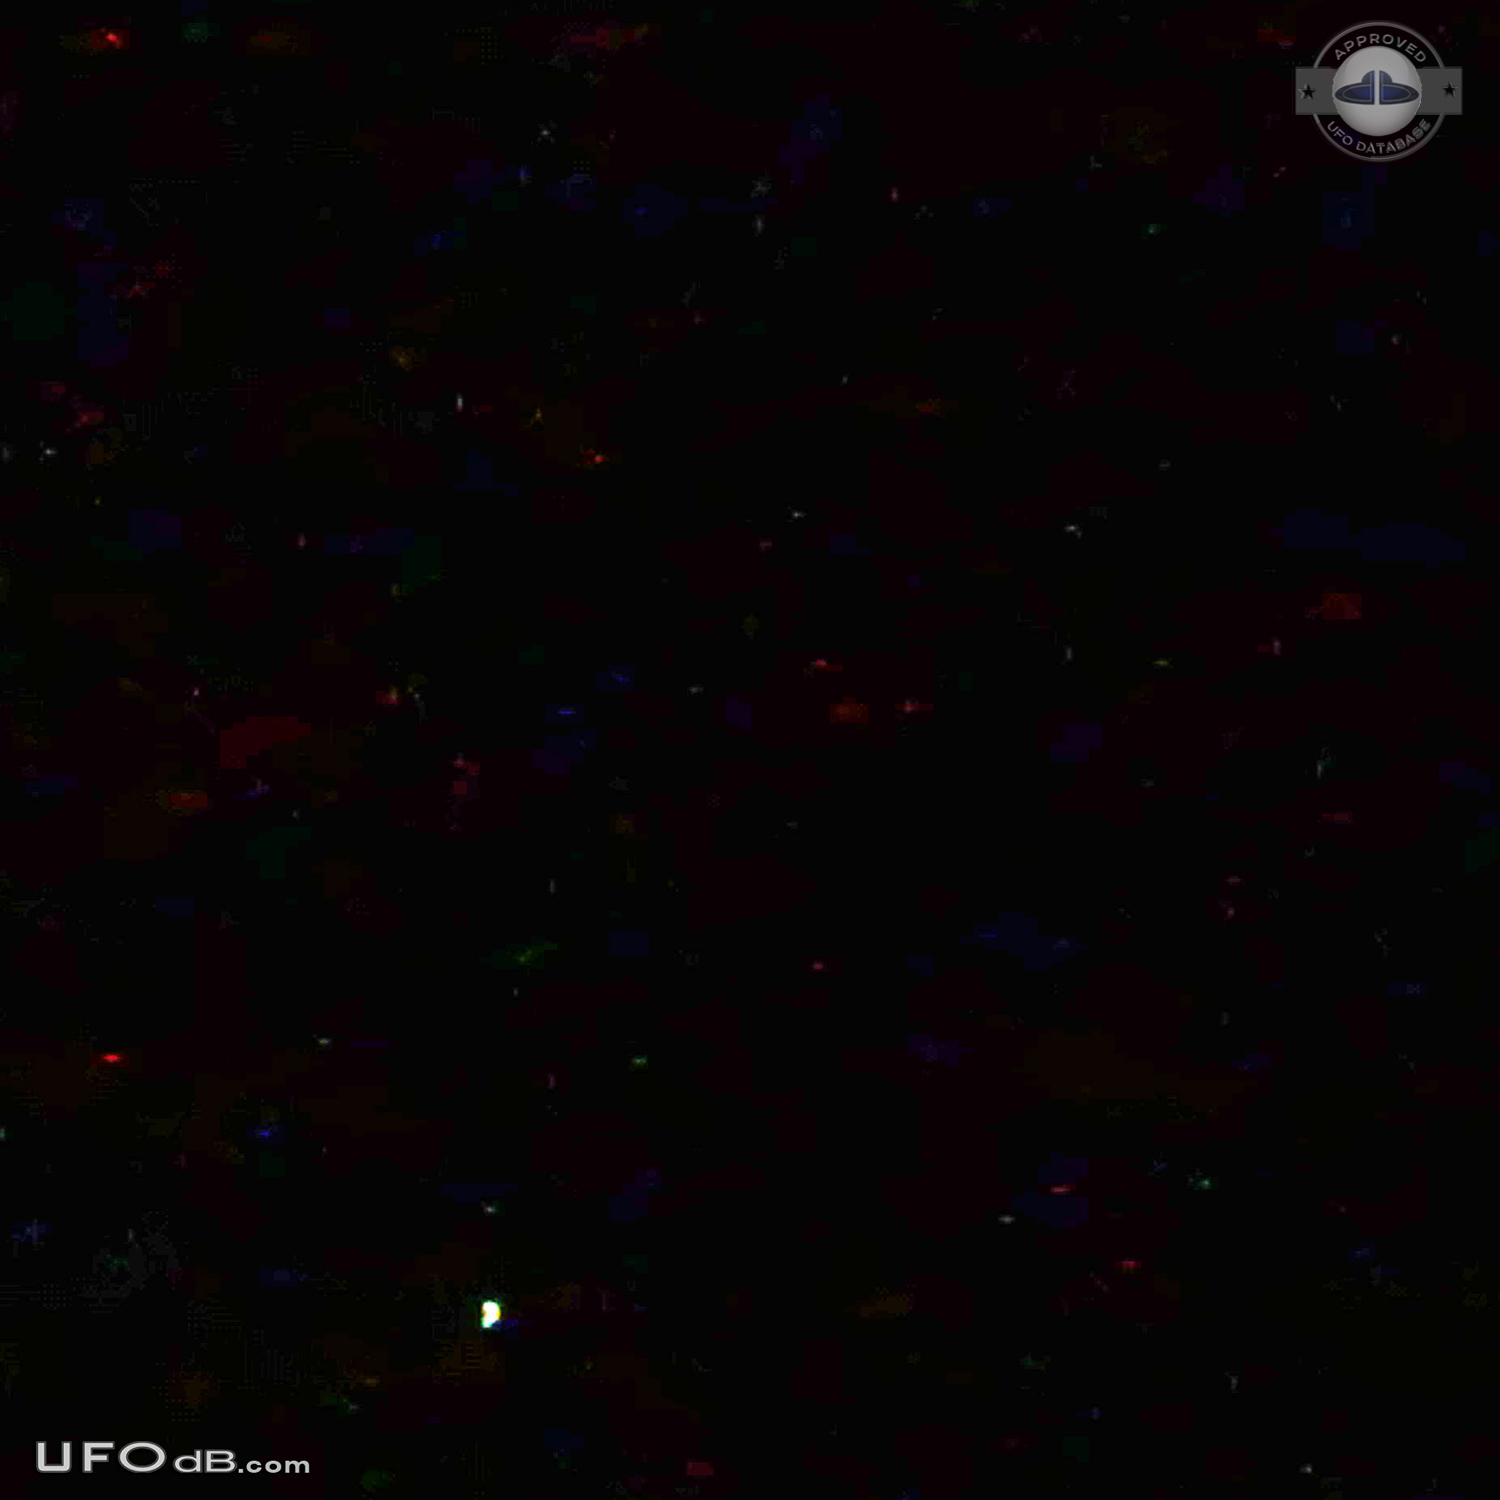 Incredible UFO sighting with pictures & details - Troyan Bulgaria 2010 UFO Picture #464-1